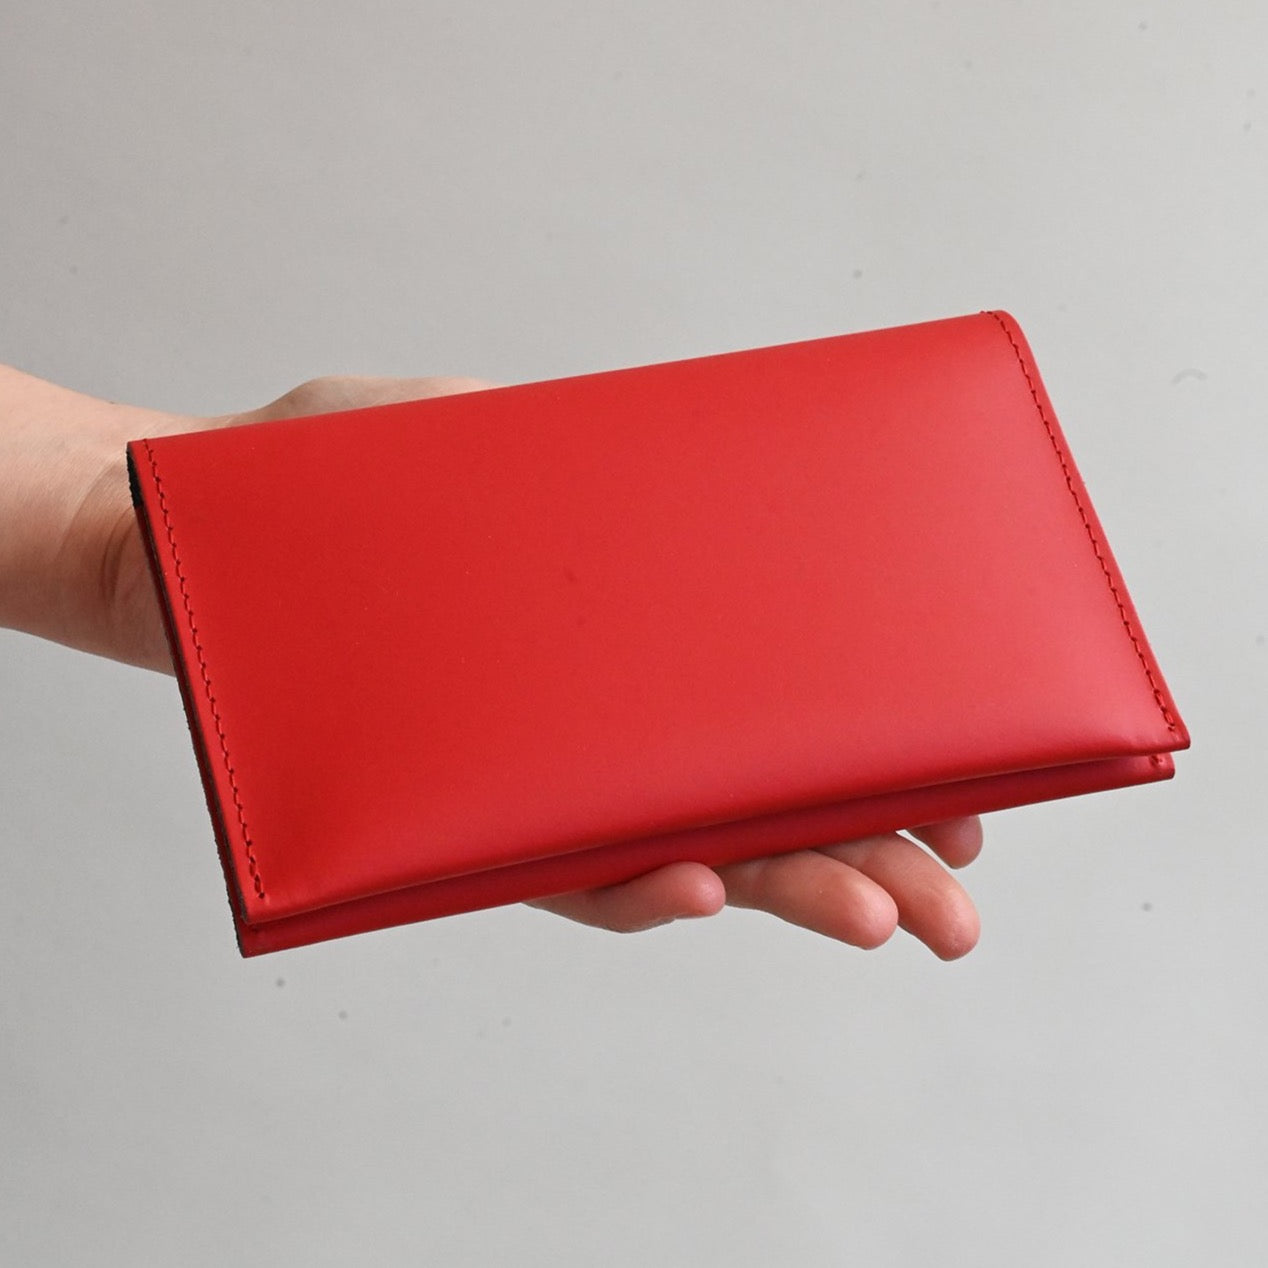 Flat wallet made of recycled leather - Walk with me